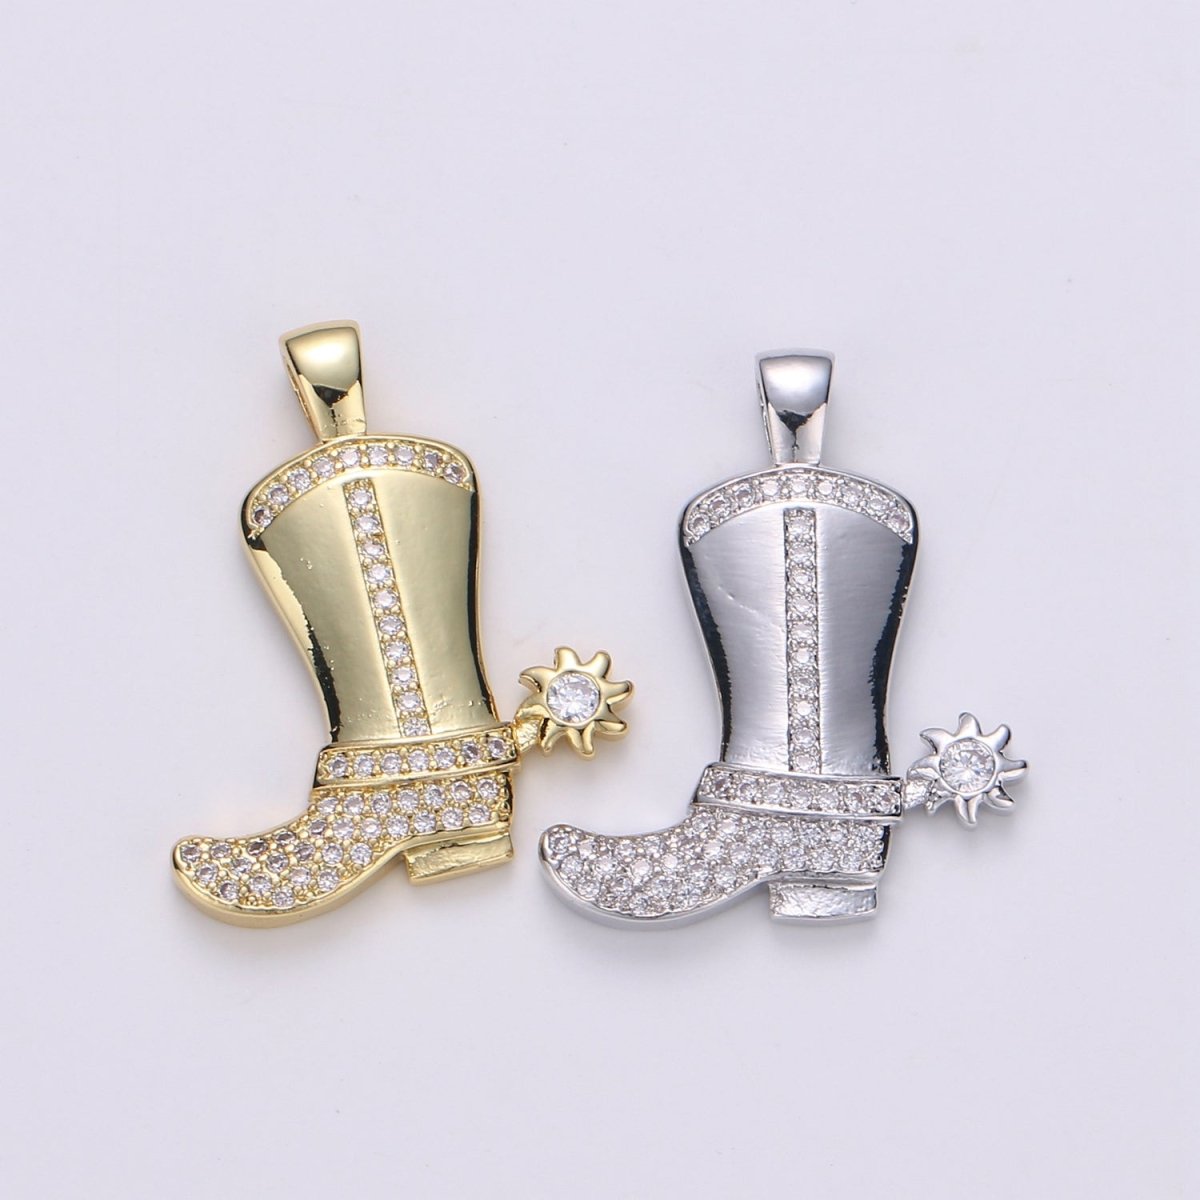 28x23mm Wholesale Gold-Filled Gold or Silver Cowboy Boot Pendant Charm with Rhinestones, Pendant for Necklace Bracelet Anklet Making J-150 J-151 - DLUXCA